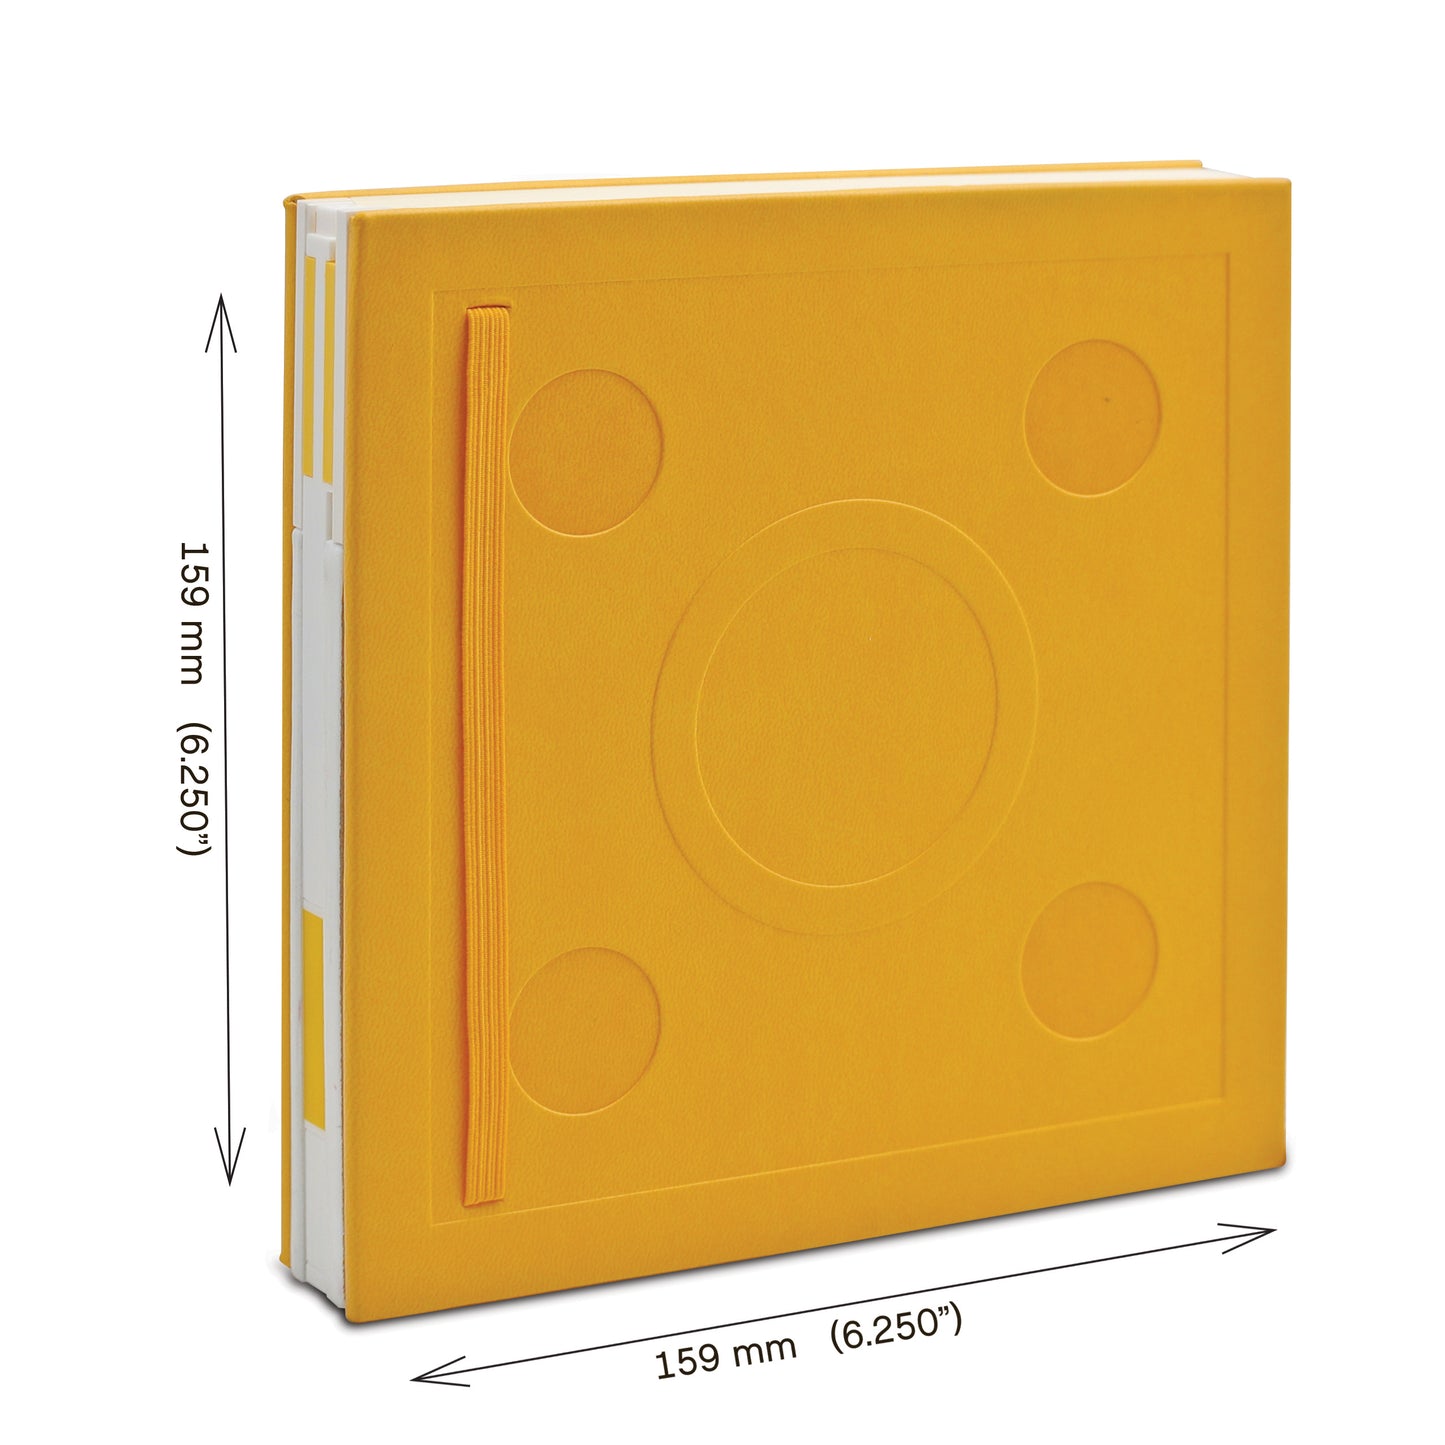 IQ LEGO® 2.0 Stationery Locking Notebook with Color-Matched Gel Pen - Yellow (52441)